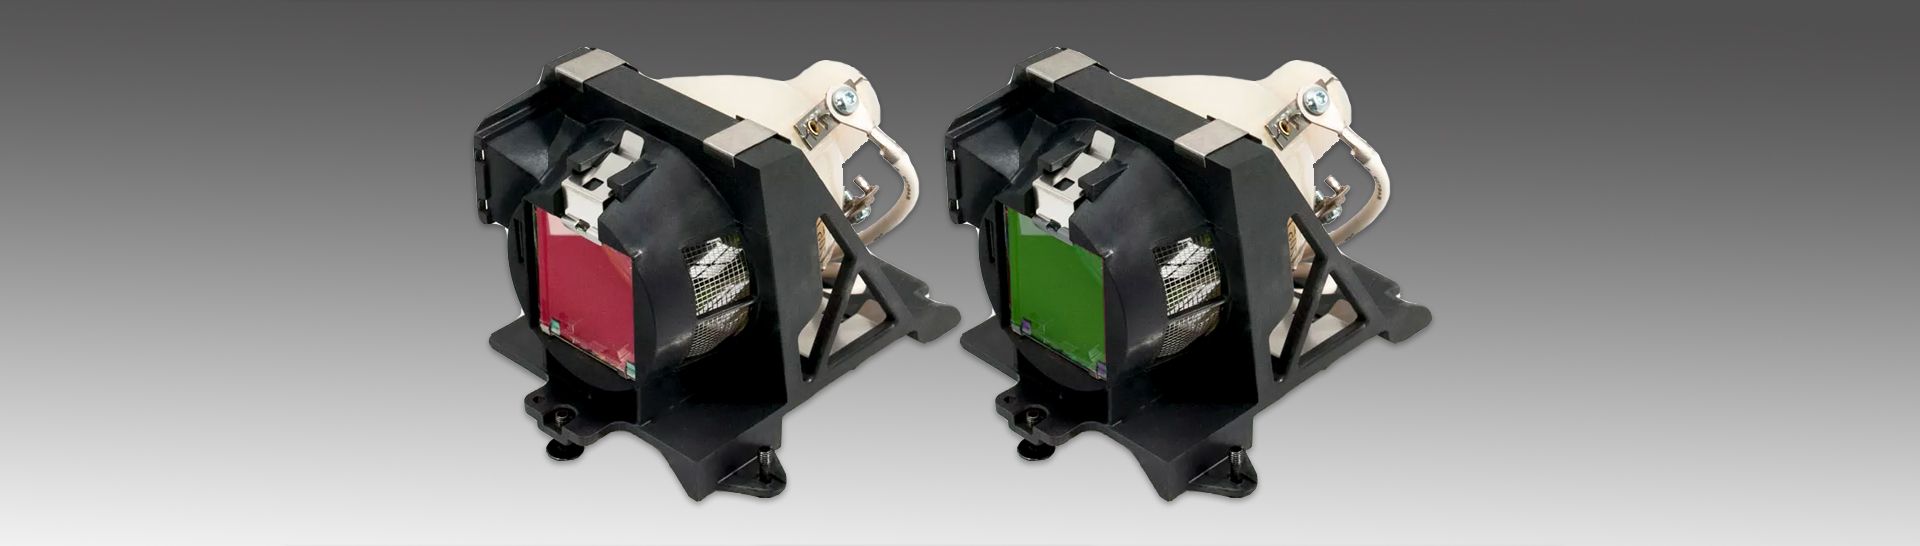 Projector lamps from Projectorpoint